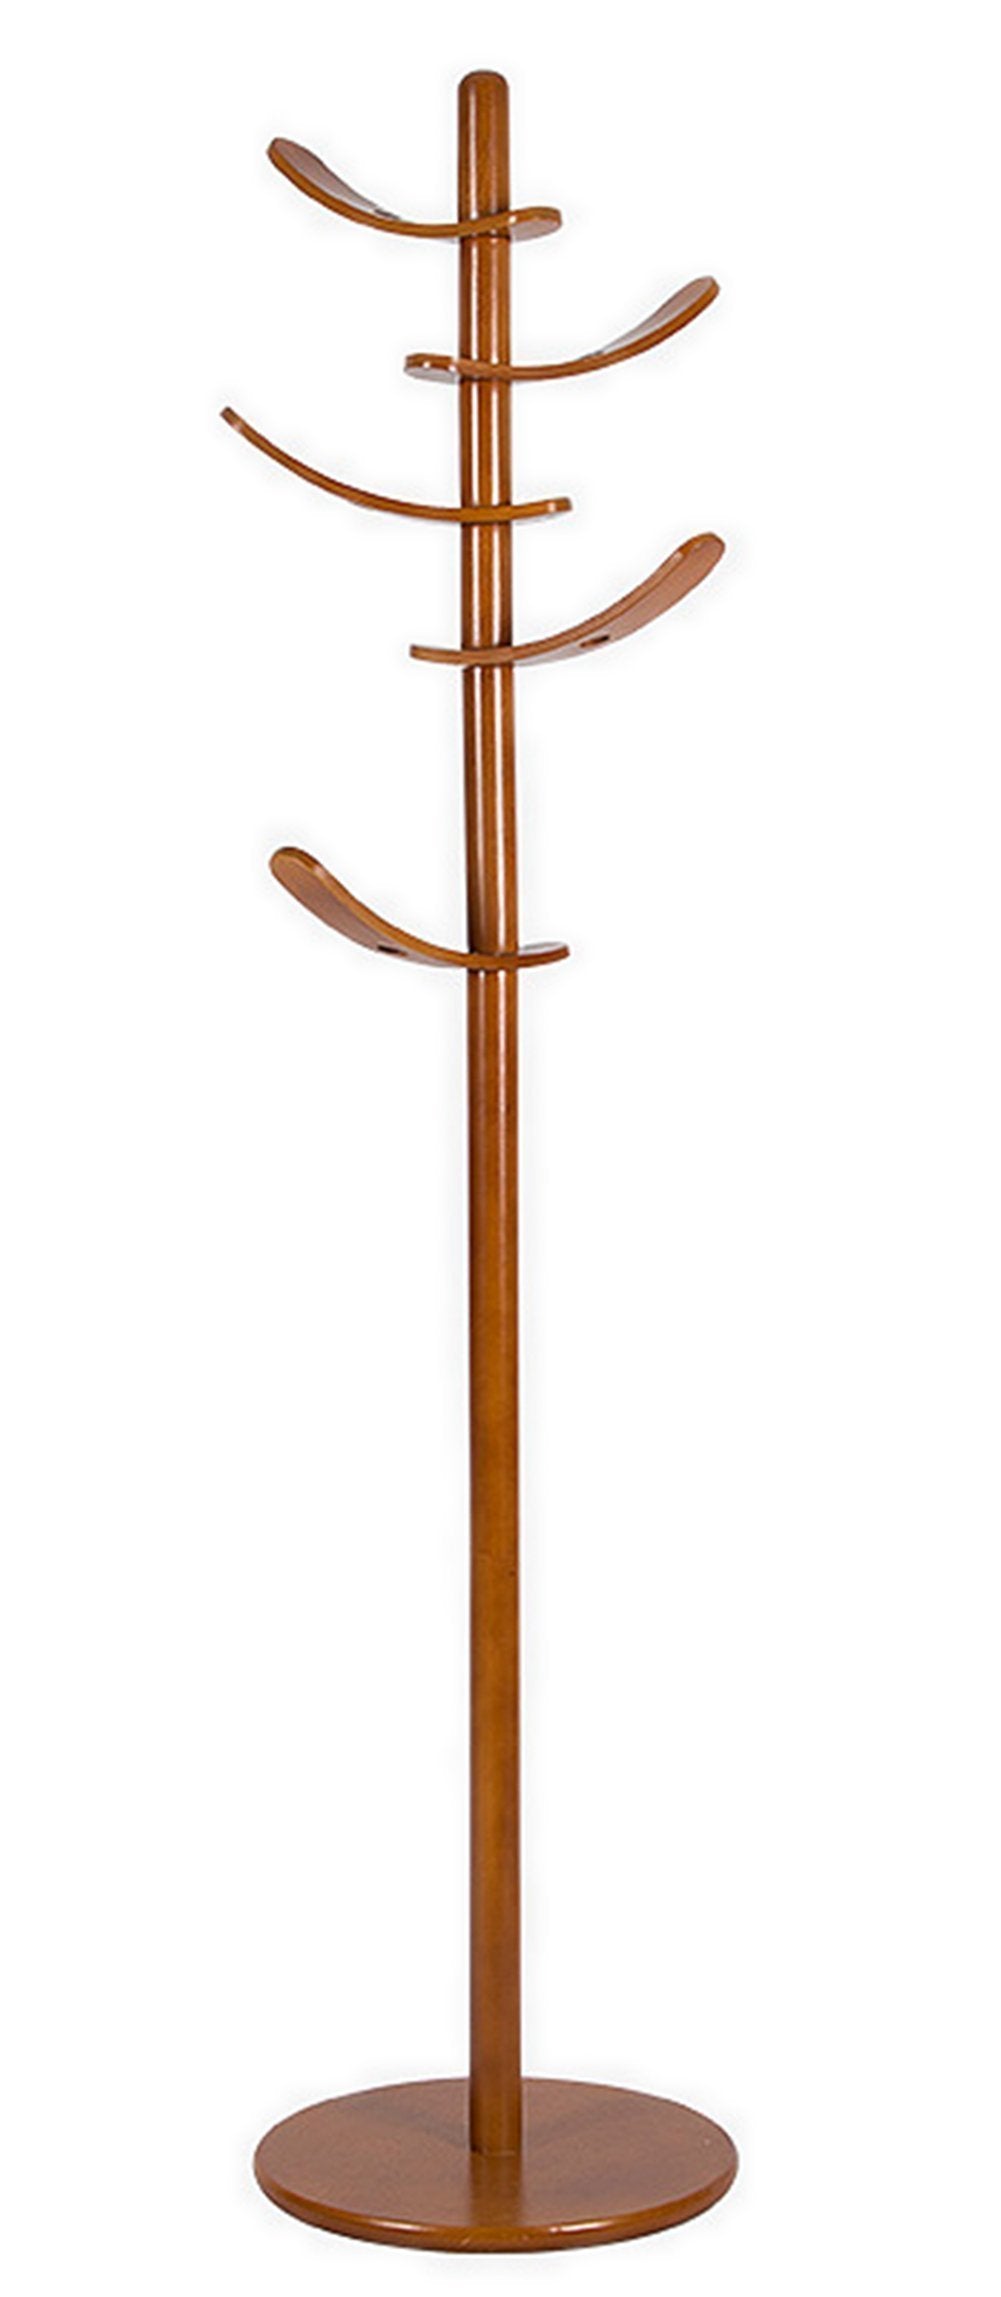 Yaker's collection Sturdy Free Standing Coat Rack with 6 Sail Rotated Hooks,Round Base Rubber Wood Hall Tree for Kids (Walnut)